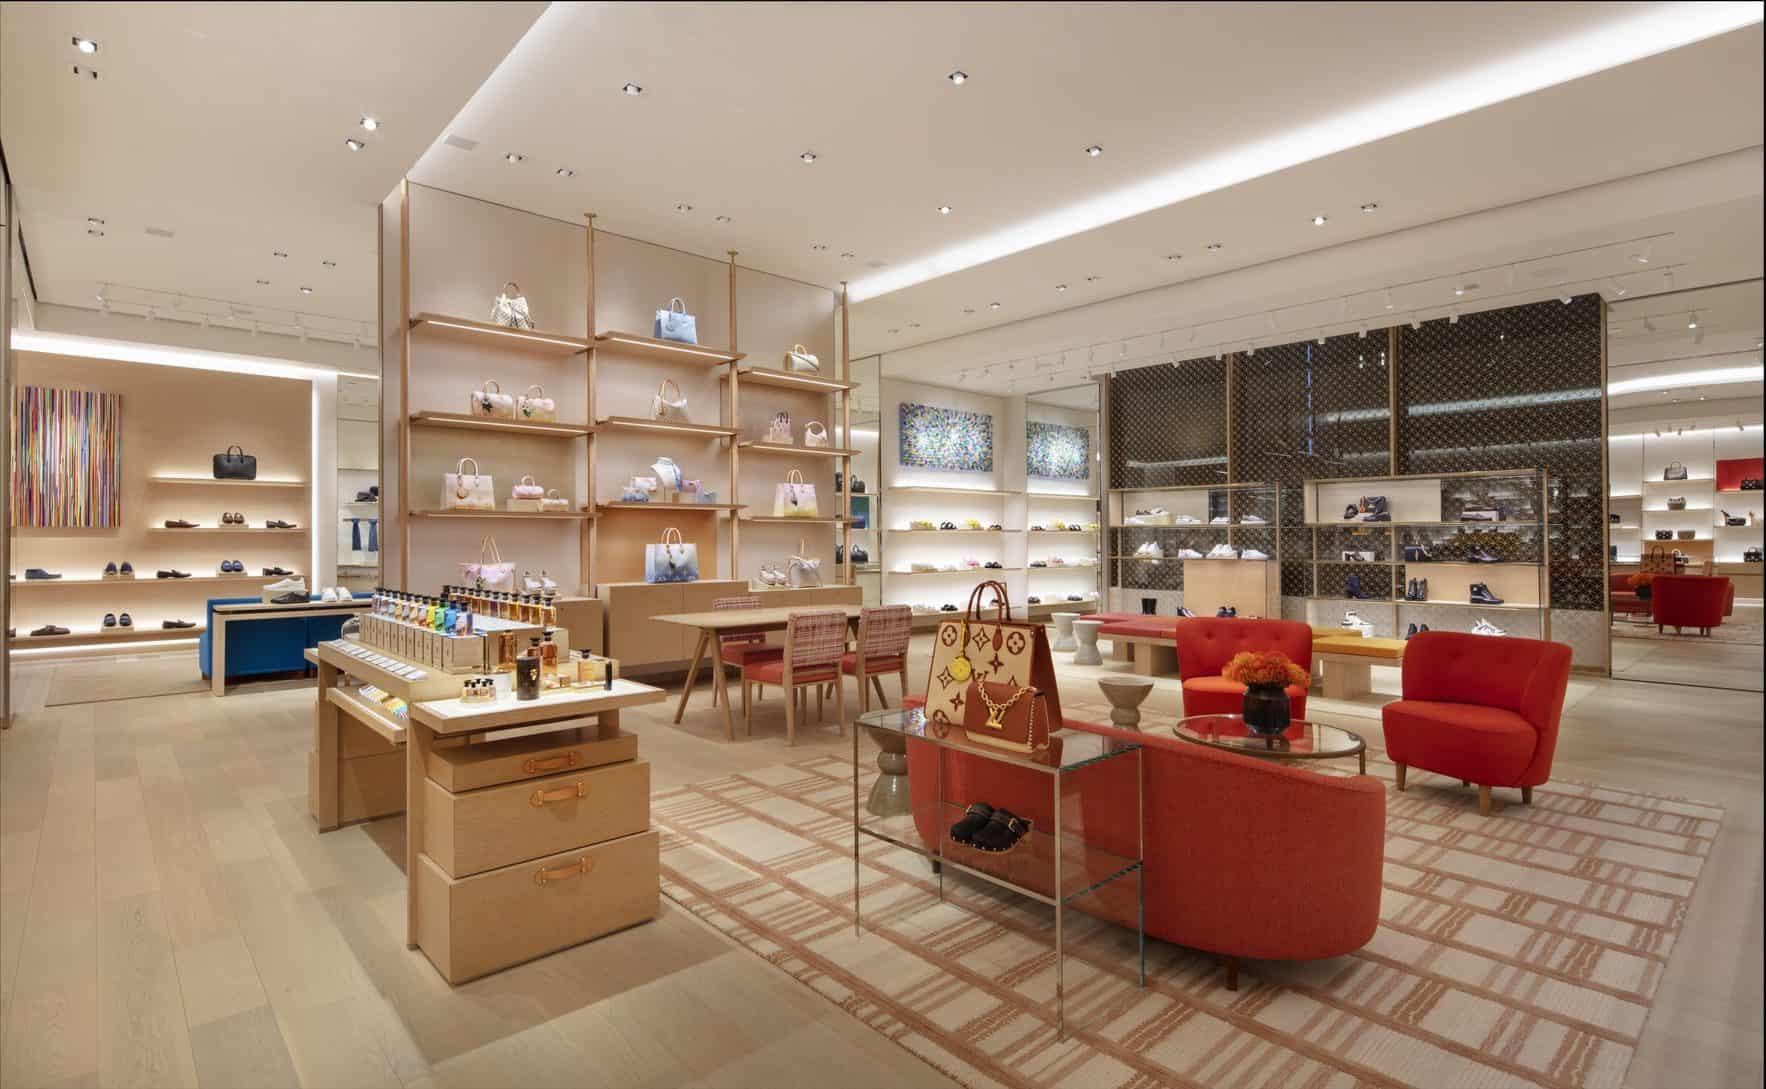 INSIDE THE NEW LOUIS VUITTON STORE